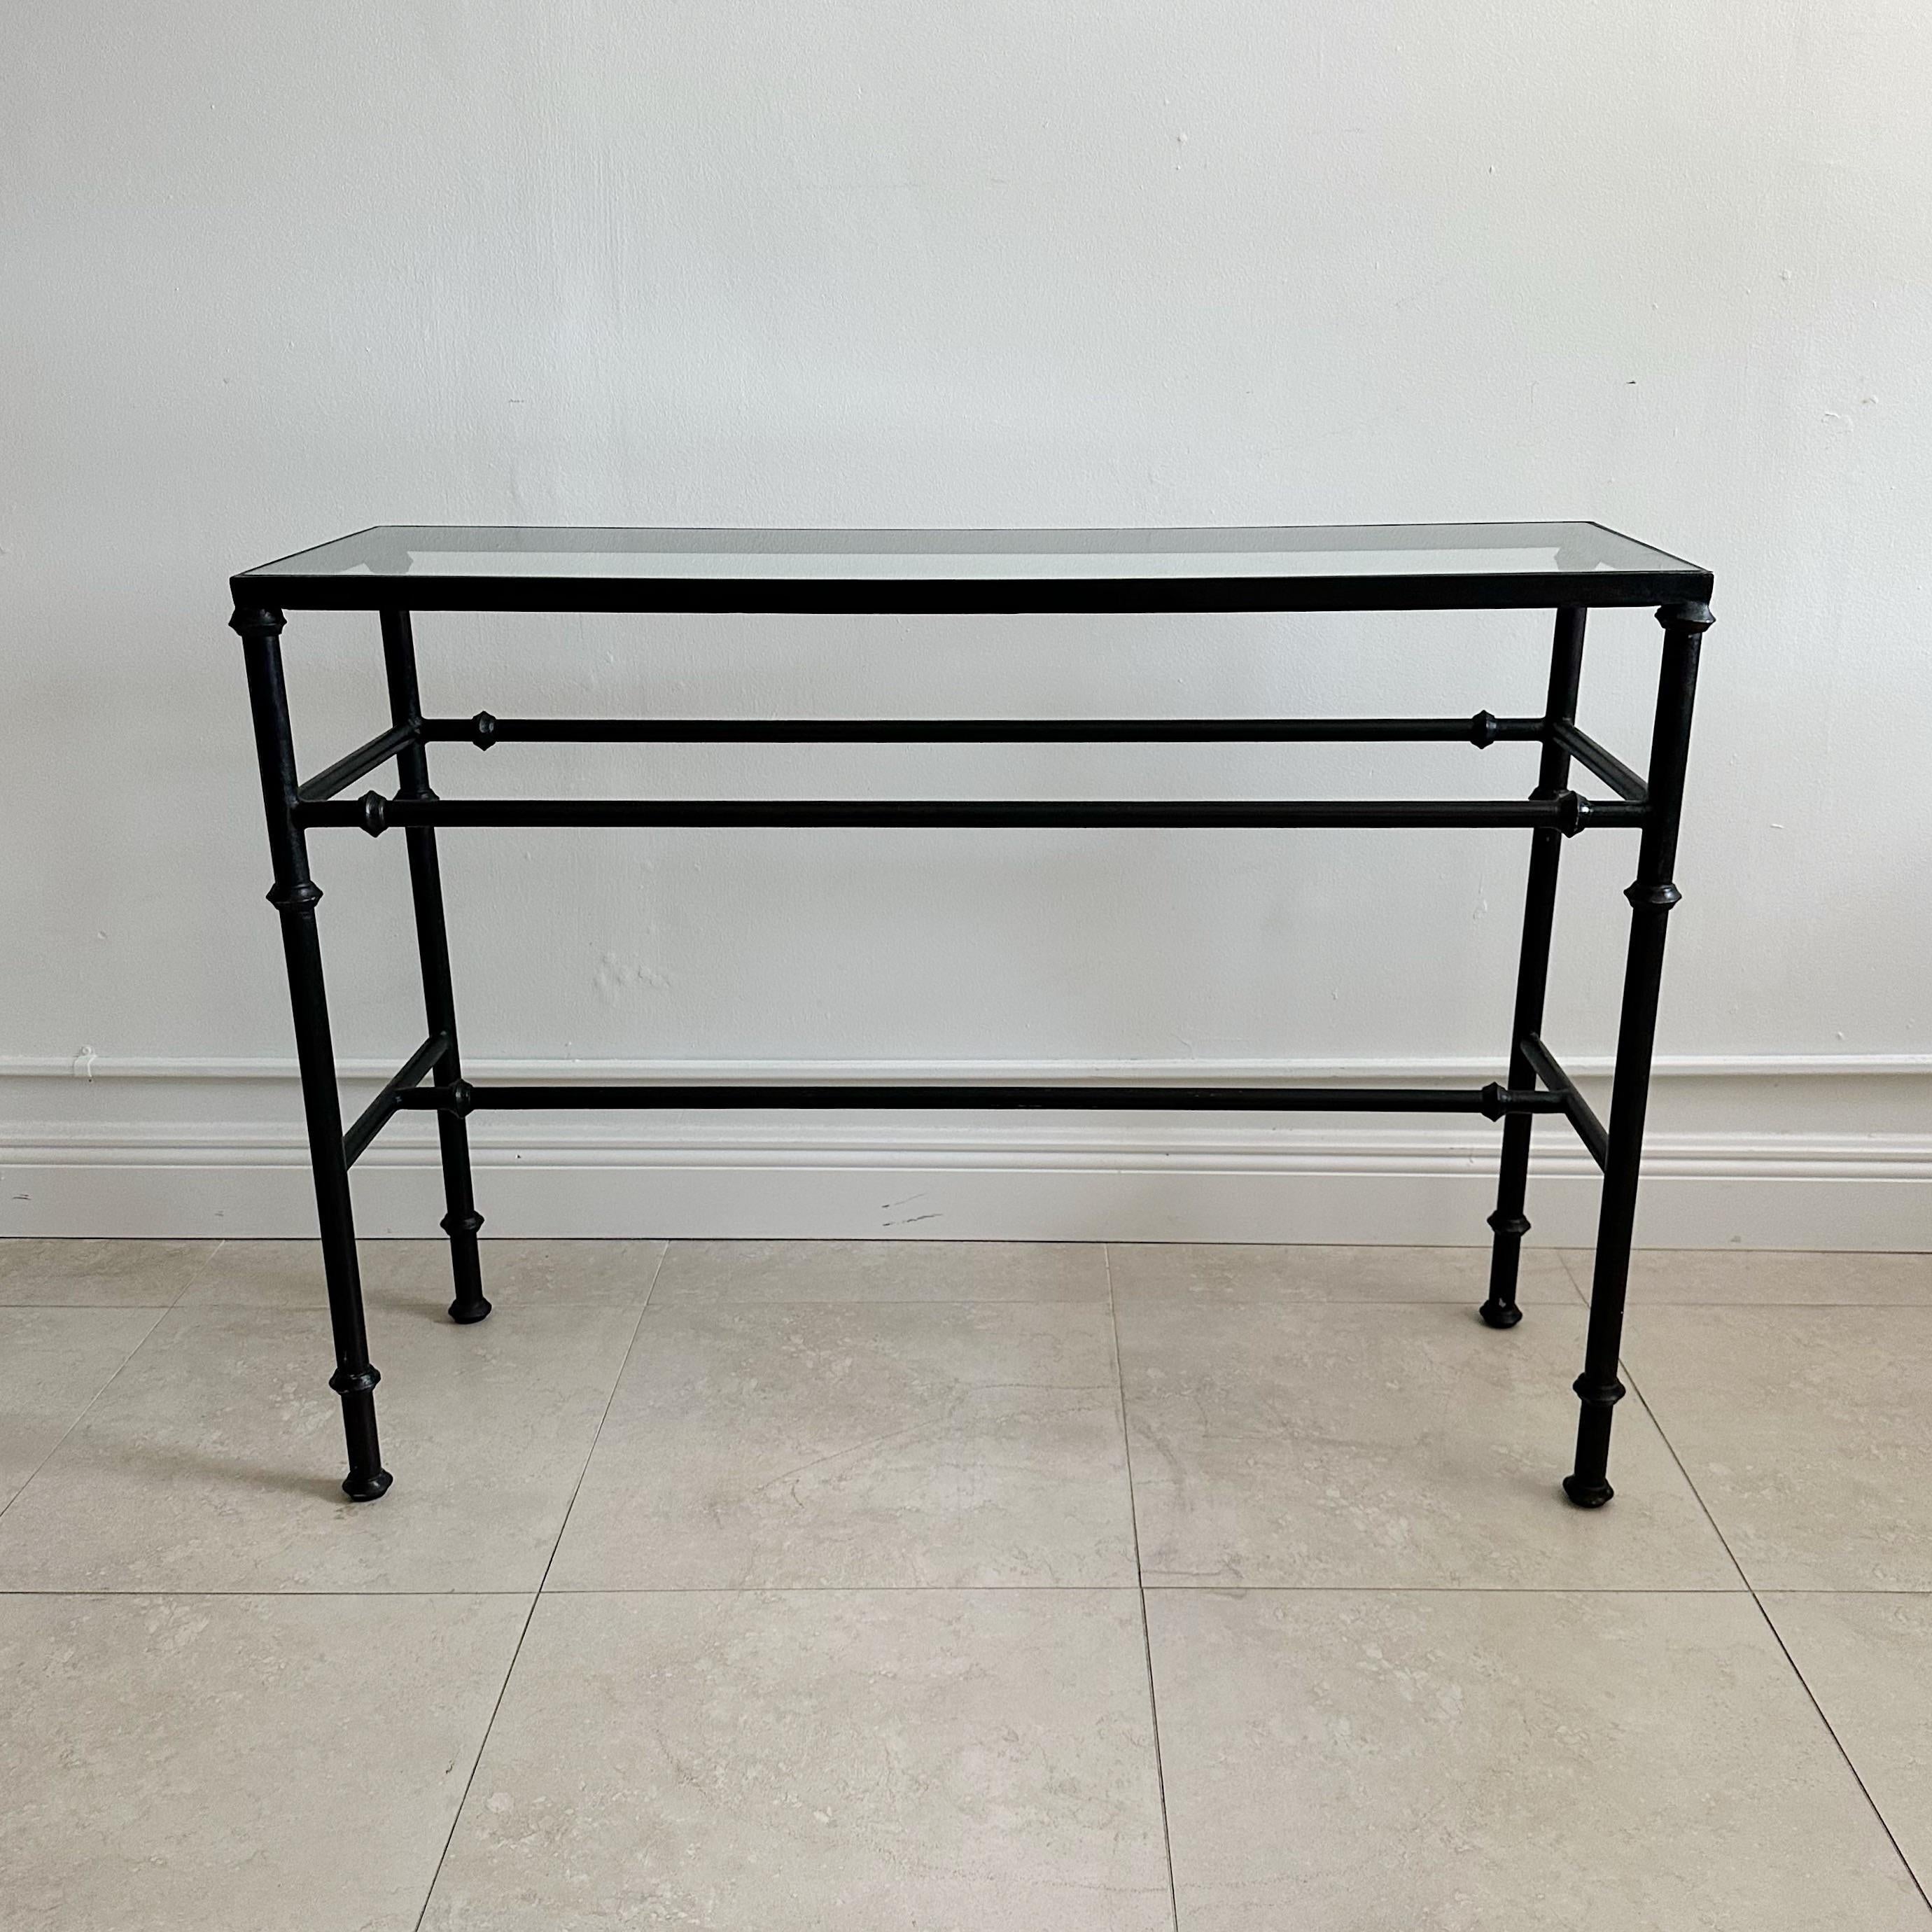 This slender Iron Console Table with inset glass is a sleek and versatile piece, painted in a black finish that makes it suitable for both indoor and outdoor use. Its petite size ensures ease of placement and utilization. The design of the table is